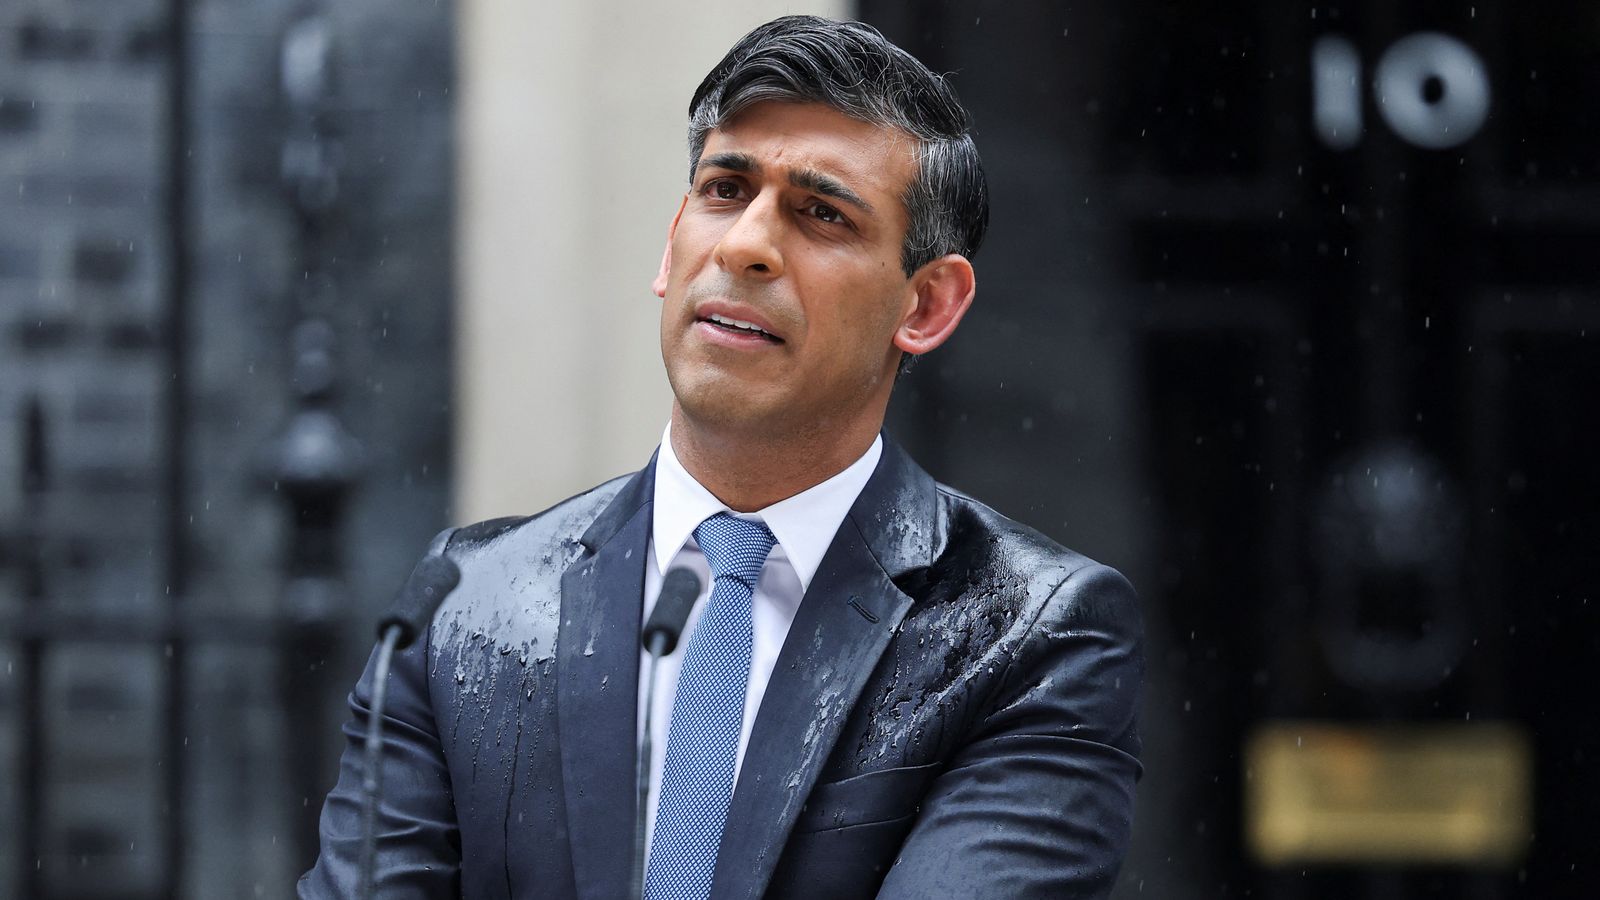 Rishi Sunak jokes he's 'avoided pneumonia' after wet election launch - as he explains Downing Street call to Yorkshire voters at Wetherspoon's